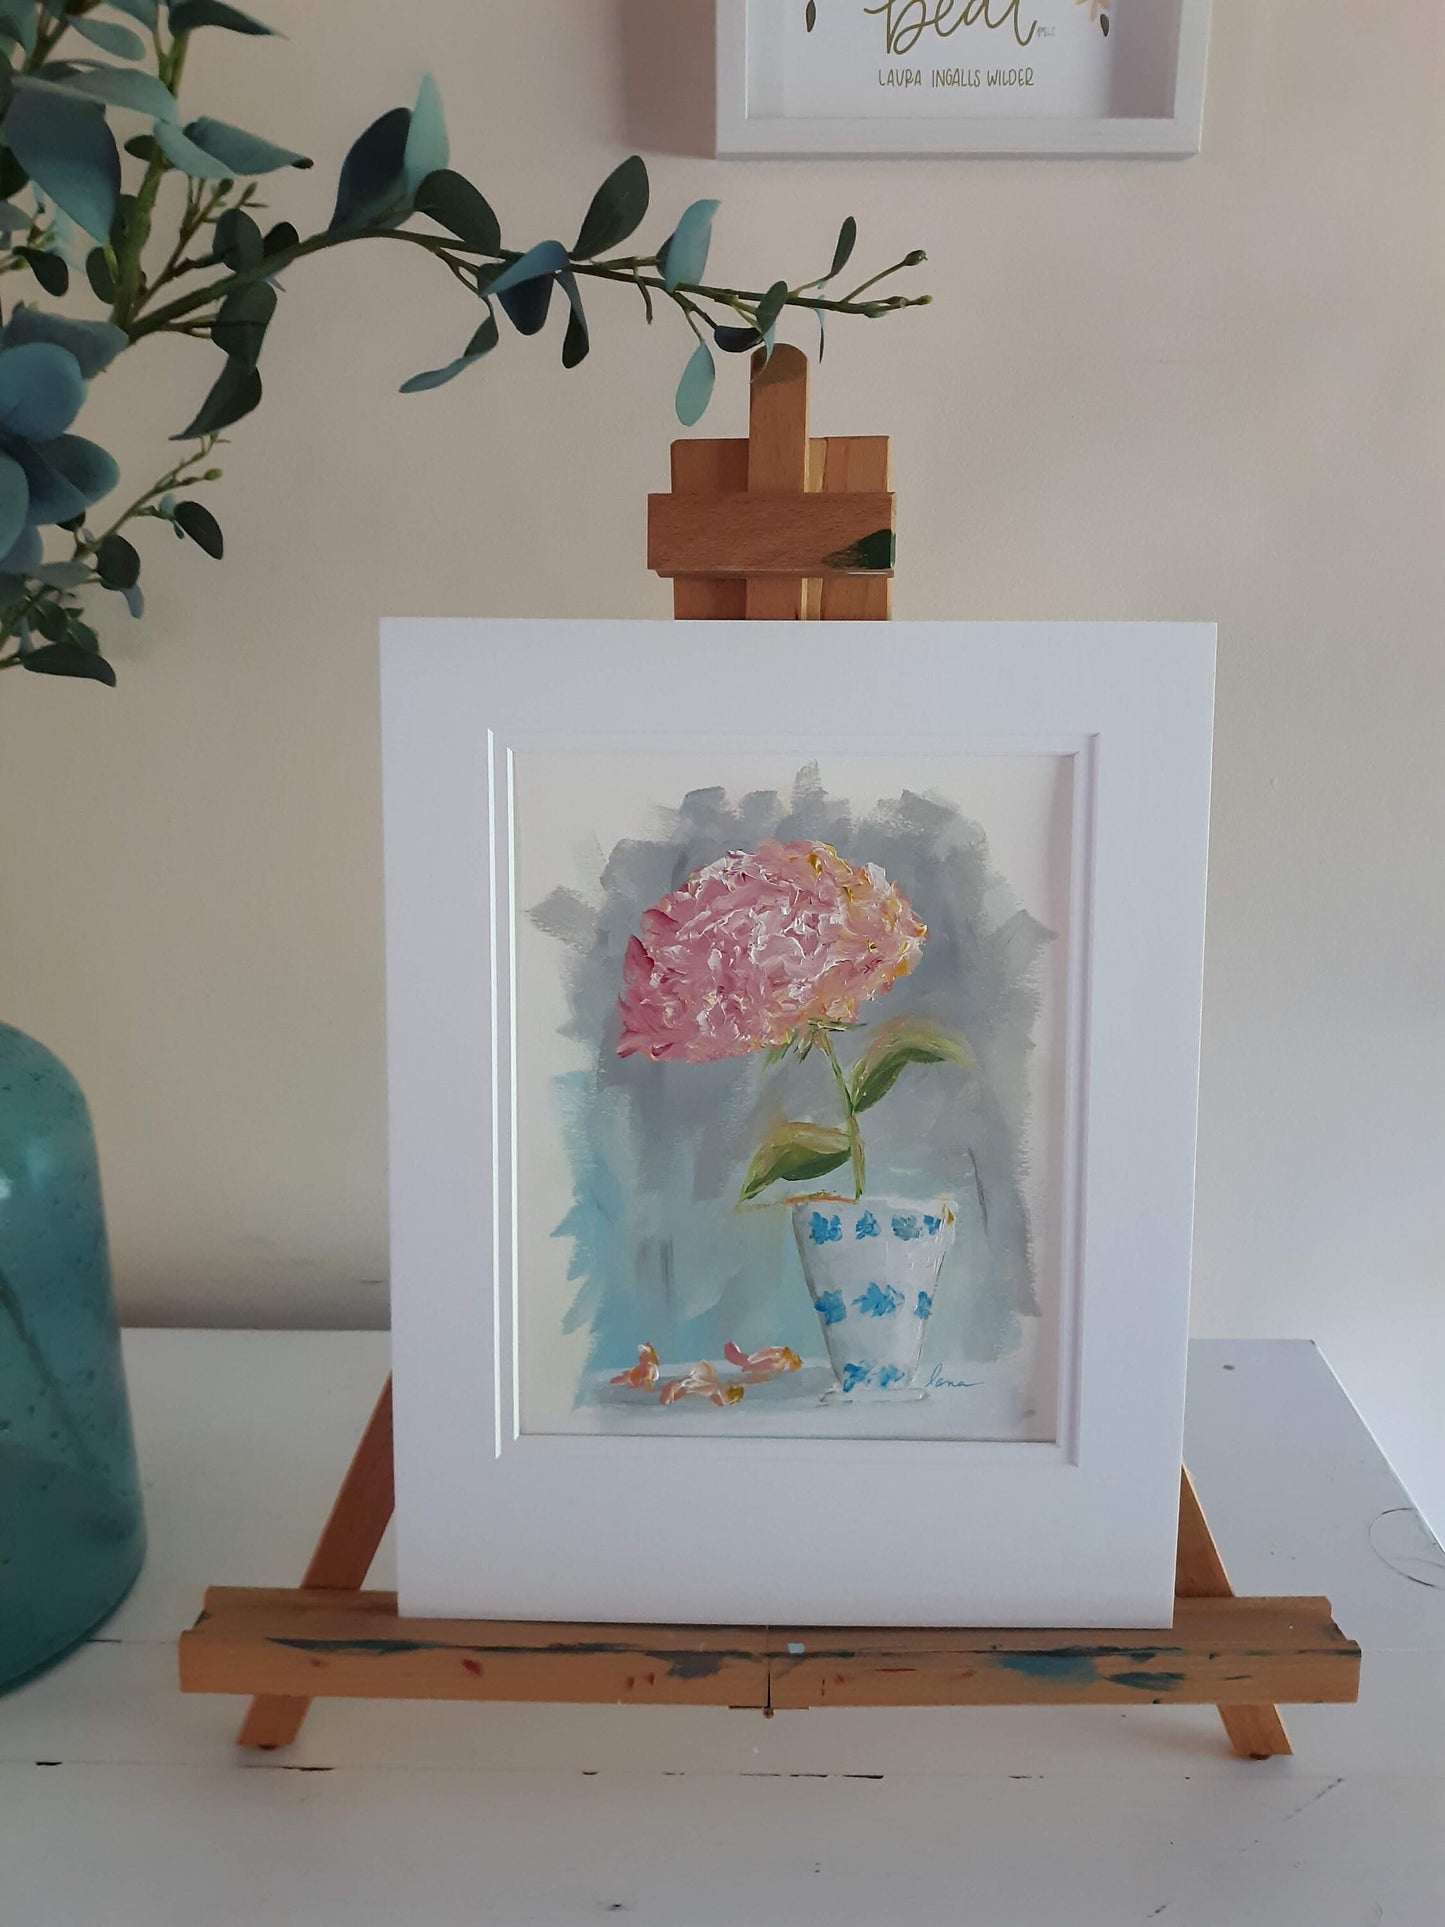 Not a Peony, Flower in Vase Painting